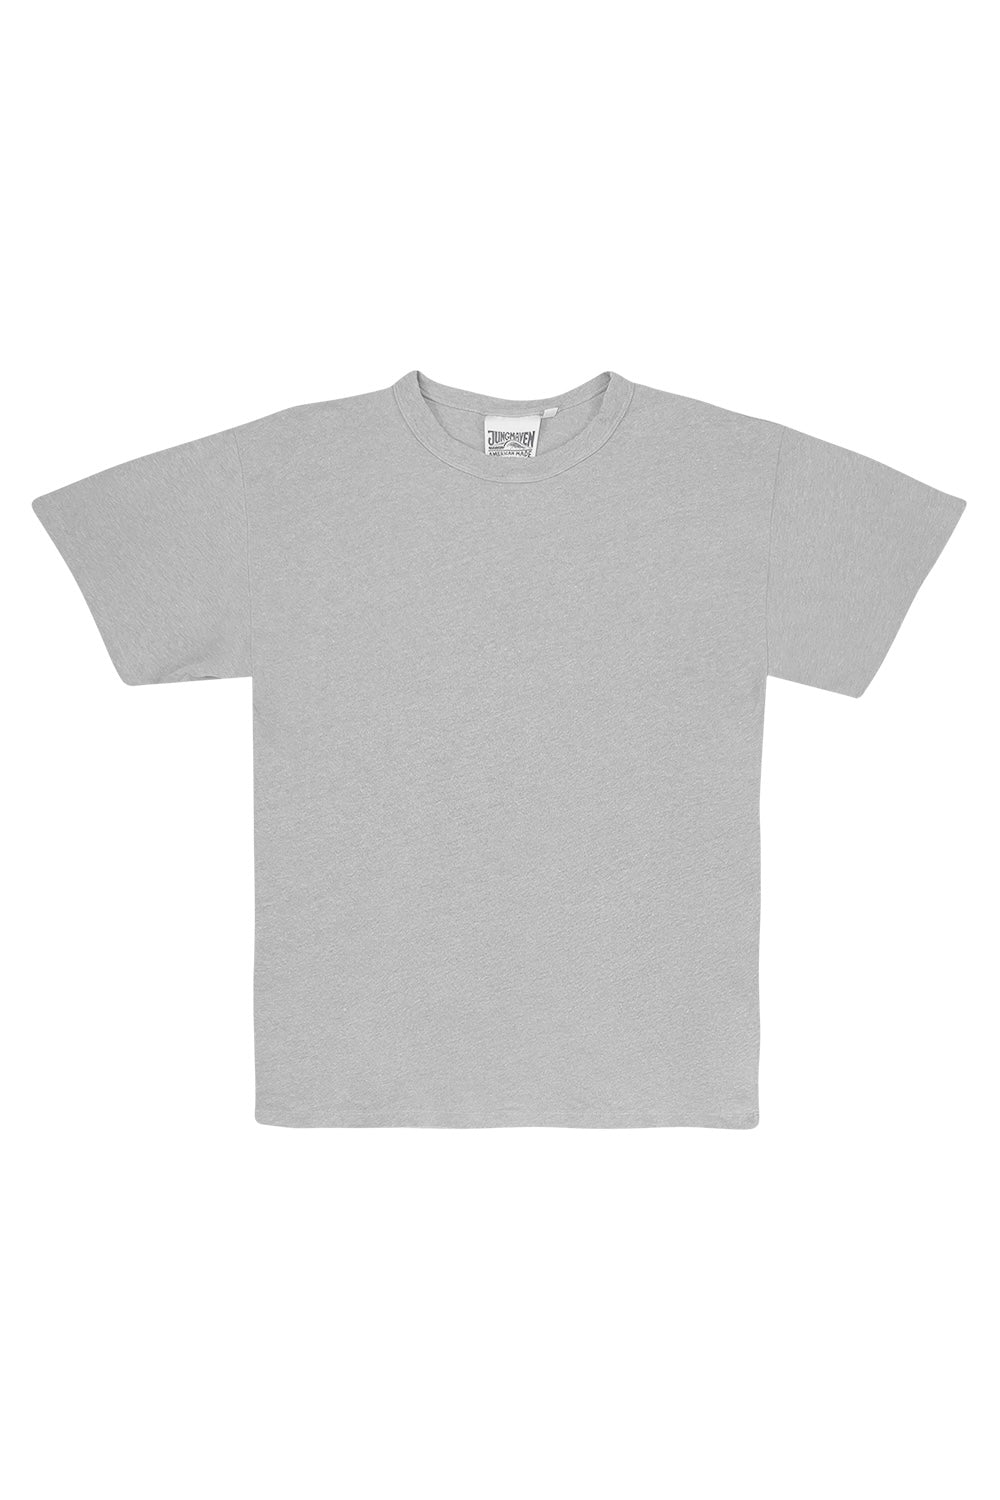 Heathered Vernon Oversized Tee | Jungmaven Hemp Clothing & Accessories / Color: Athletic Gray